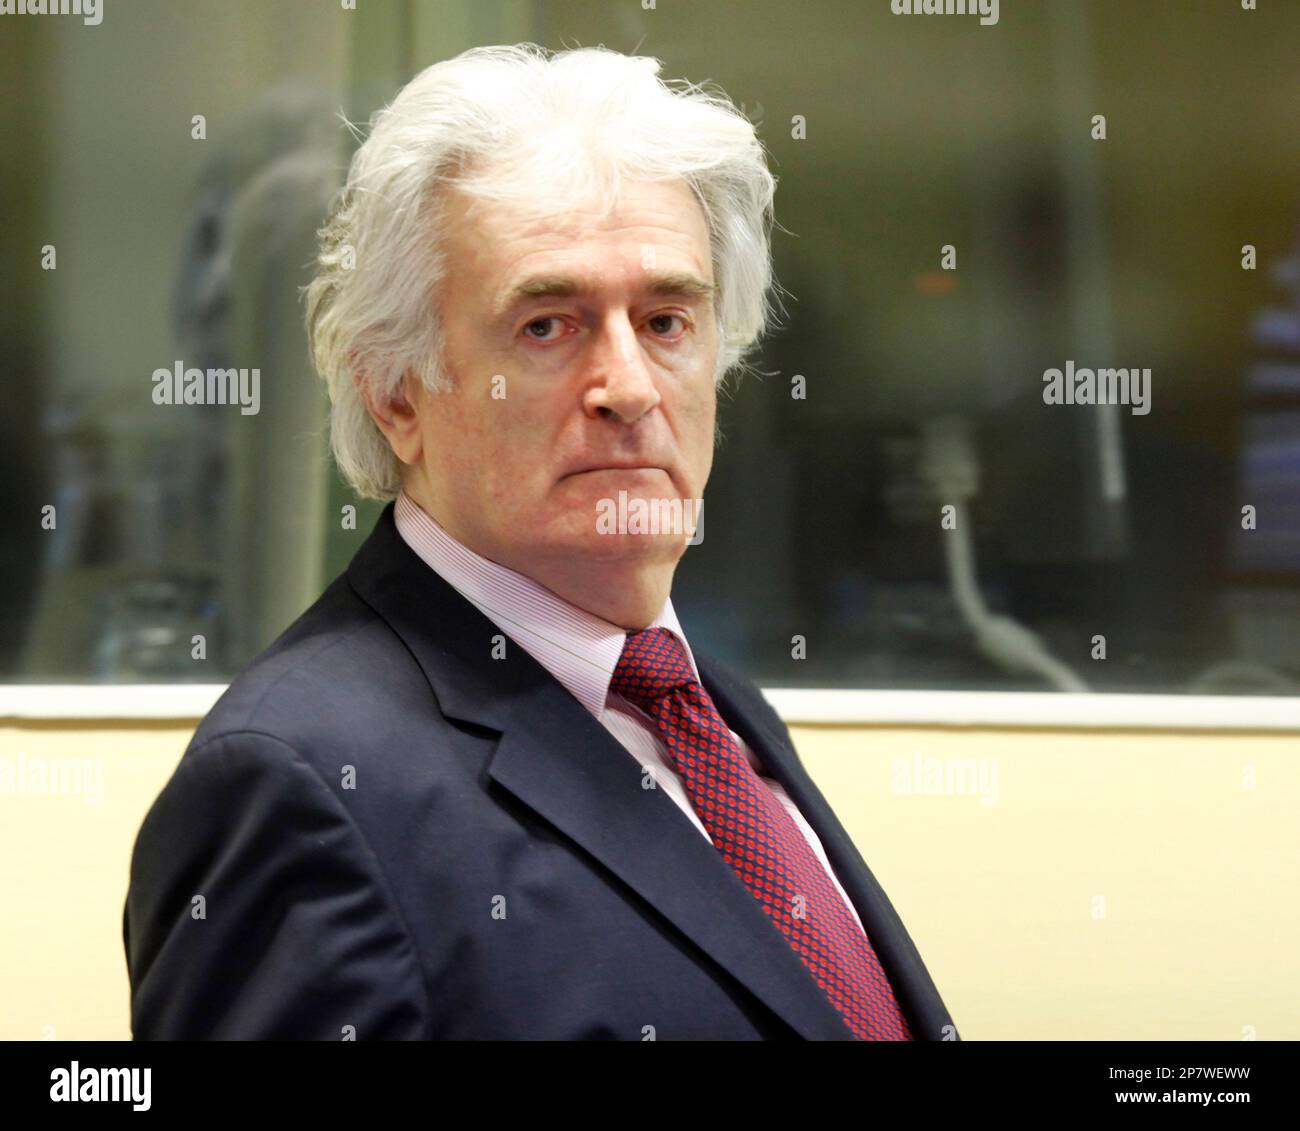 Former Bosnian Serb leader Radovan Karadzic enters the courtroom of the U.N.'s Yugoslav war crimes tribunal in The Hague, Netherlands, Tuesday Nov. 3, 2009. Radovan Karadzic appeared in the courtroom for the first time since his trial began last week on charges of ordering Serb atrocities throughout the Bosnian war. Karadzic has boycotted the trial's first three days, saying he has not had enough time to prepare his defense even though he was indicted in 1995. (AP Photo/Michael Kooren/Pool) Stock Photo